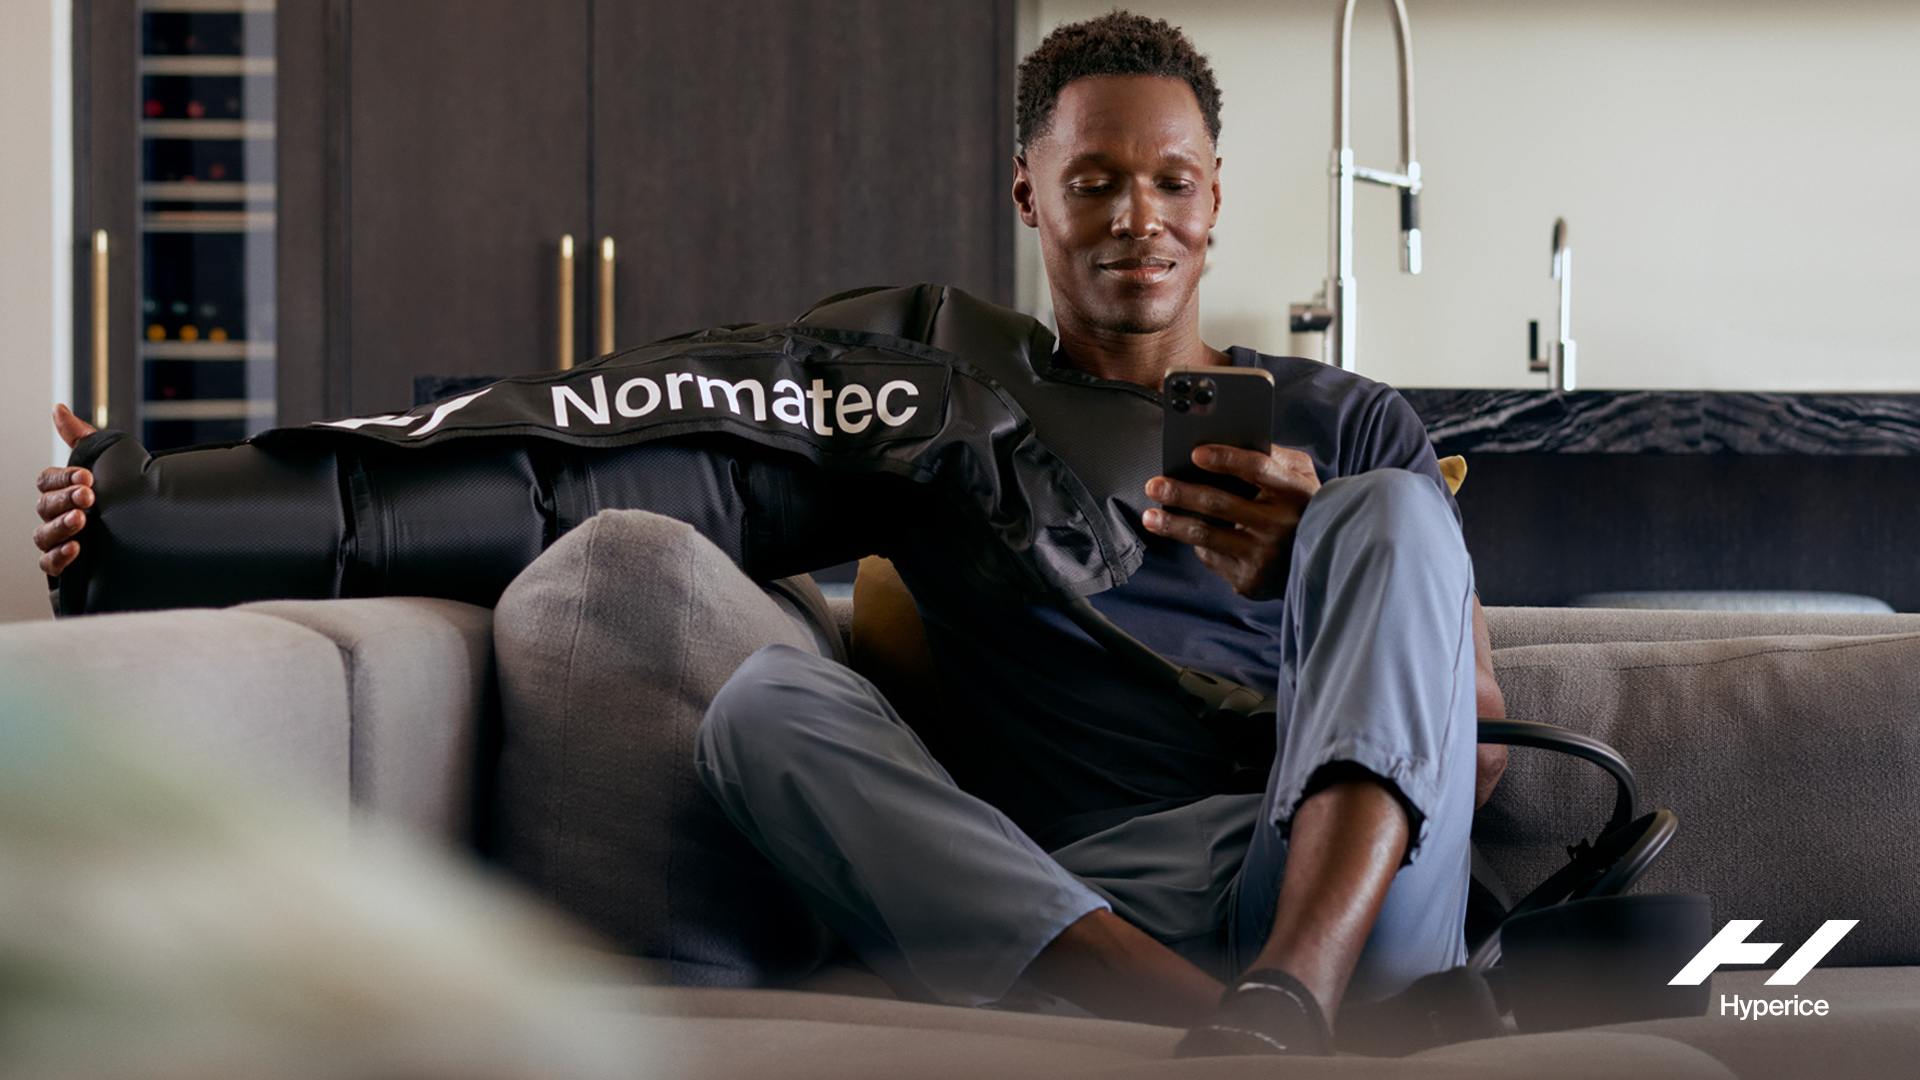 Is Normatec The Next Big Thing? - River Oaks Drip Spa